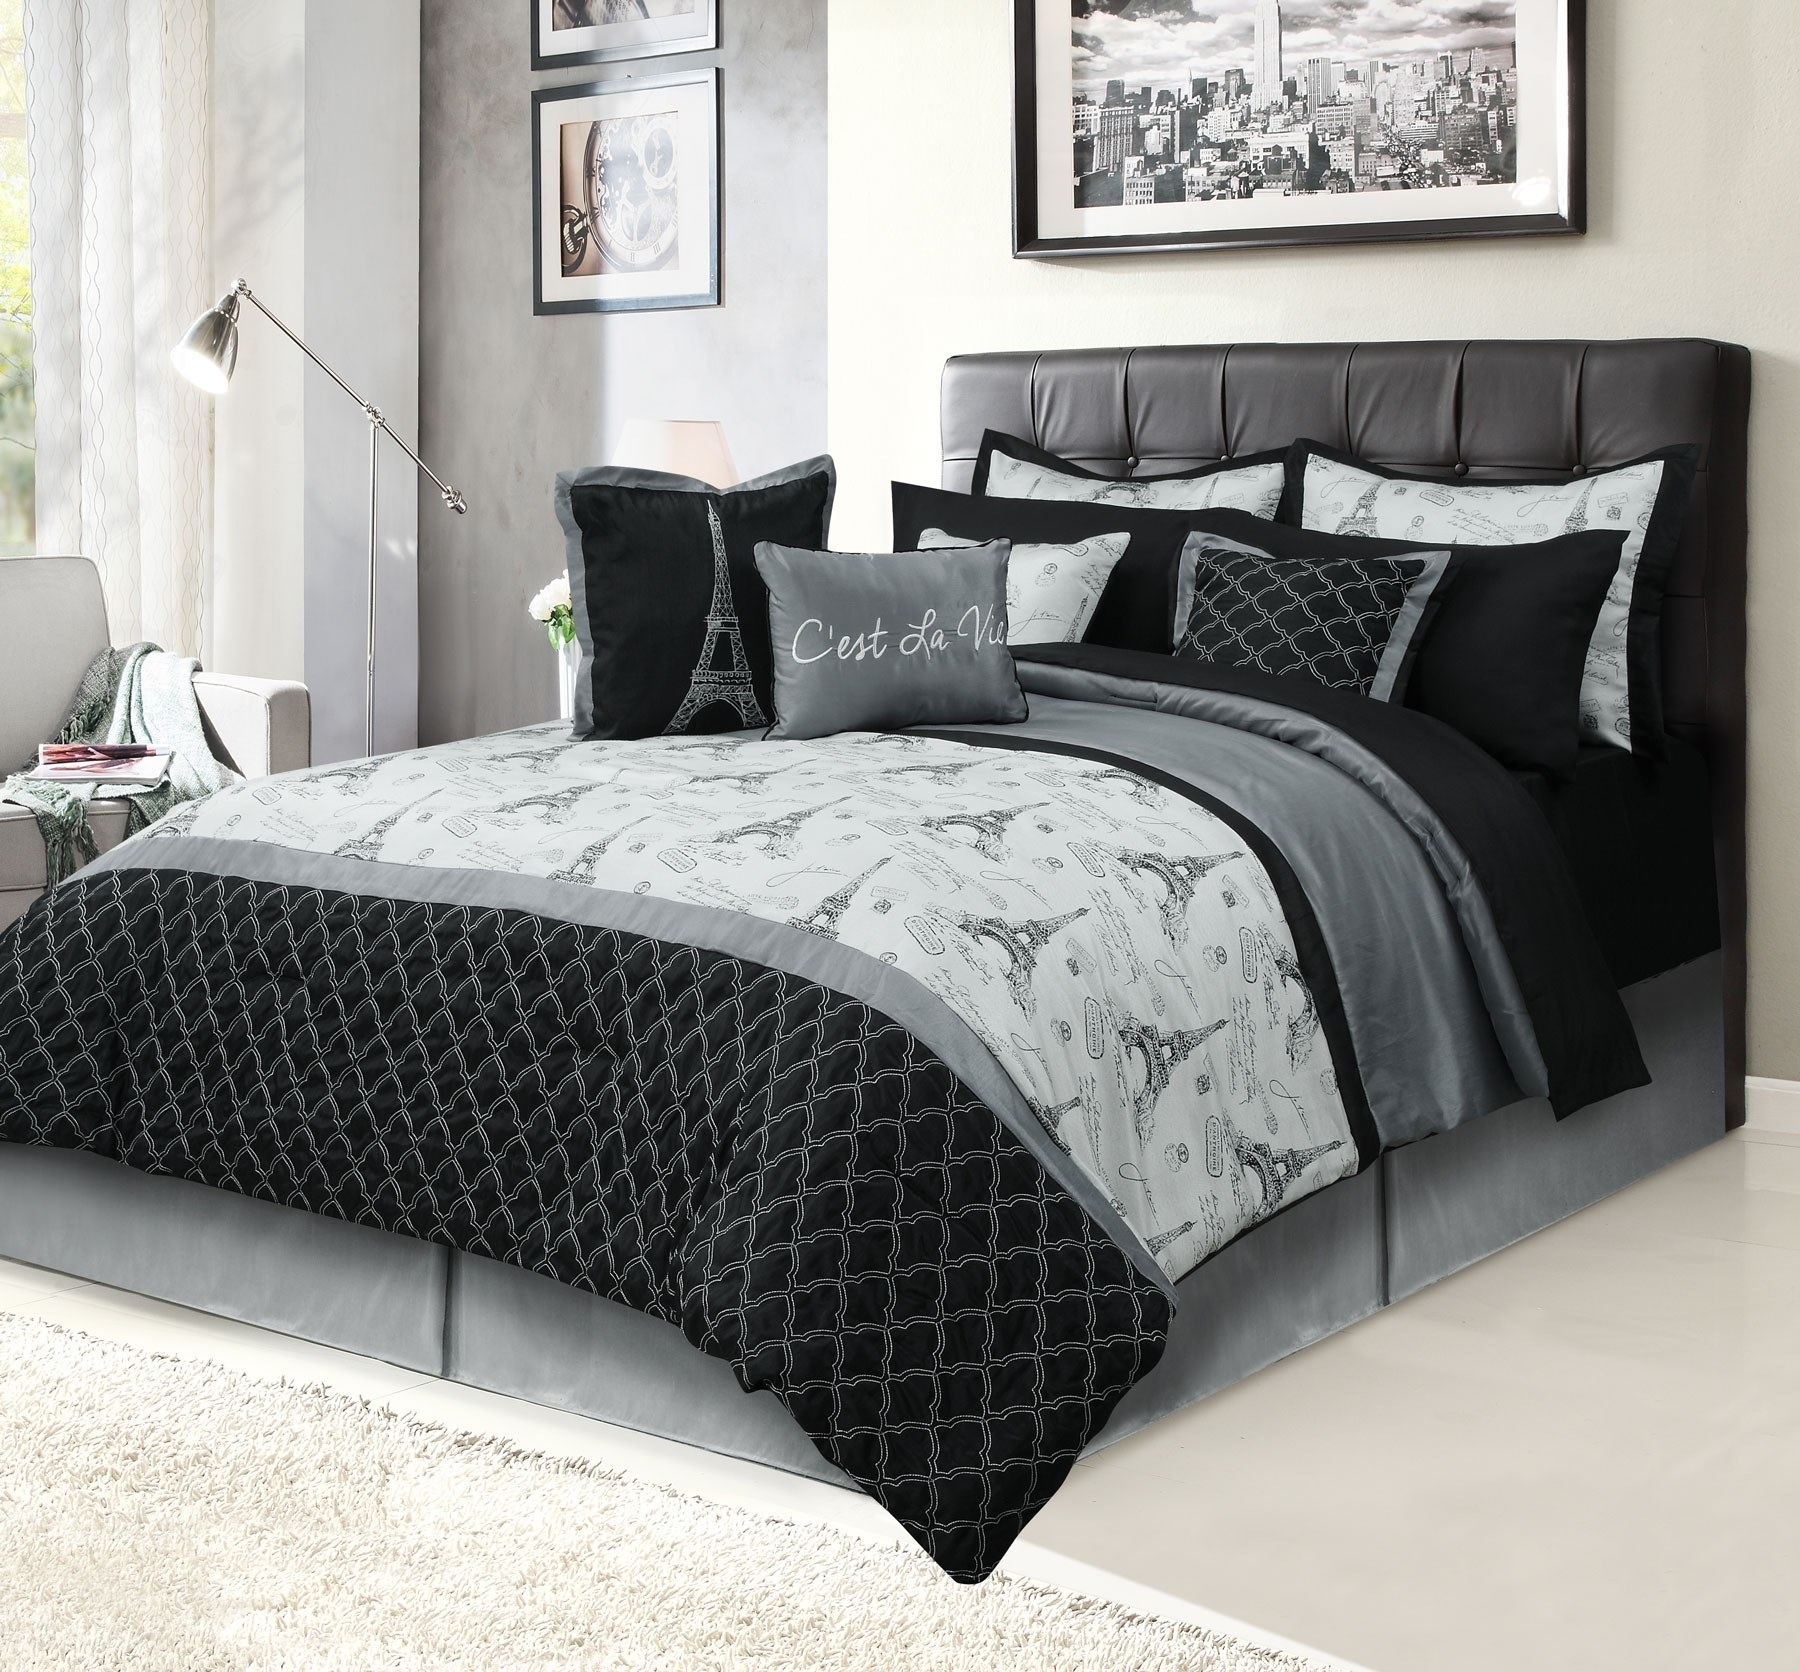 An image of a 12-piece bedding set that includes one comforter, two shams, four decorative pillows, a four-piece sheet set, and a bed skirt